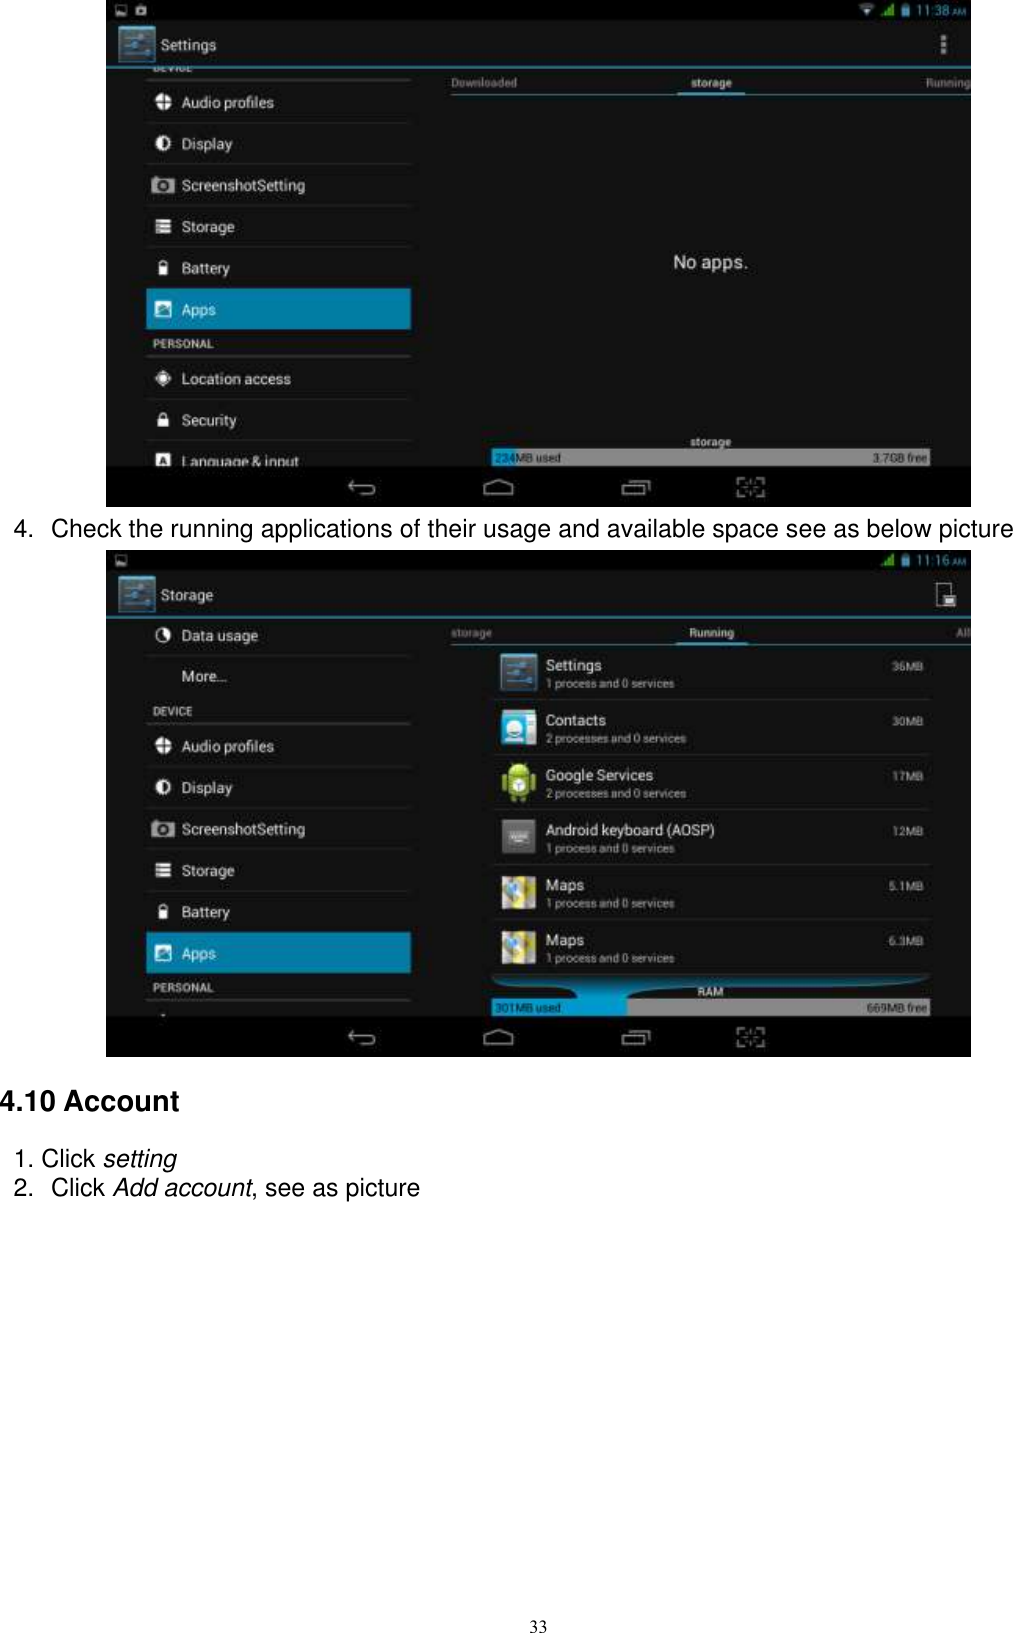      33  4.  Check the running applications of their usage and available space see as below picture    4.10 Account 1. Click setting 2.  Click Add account, see as picture   